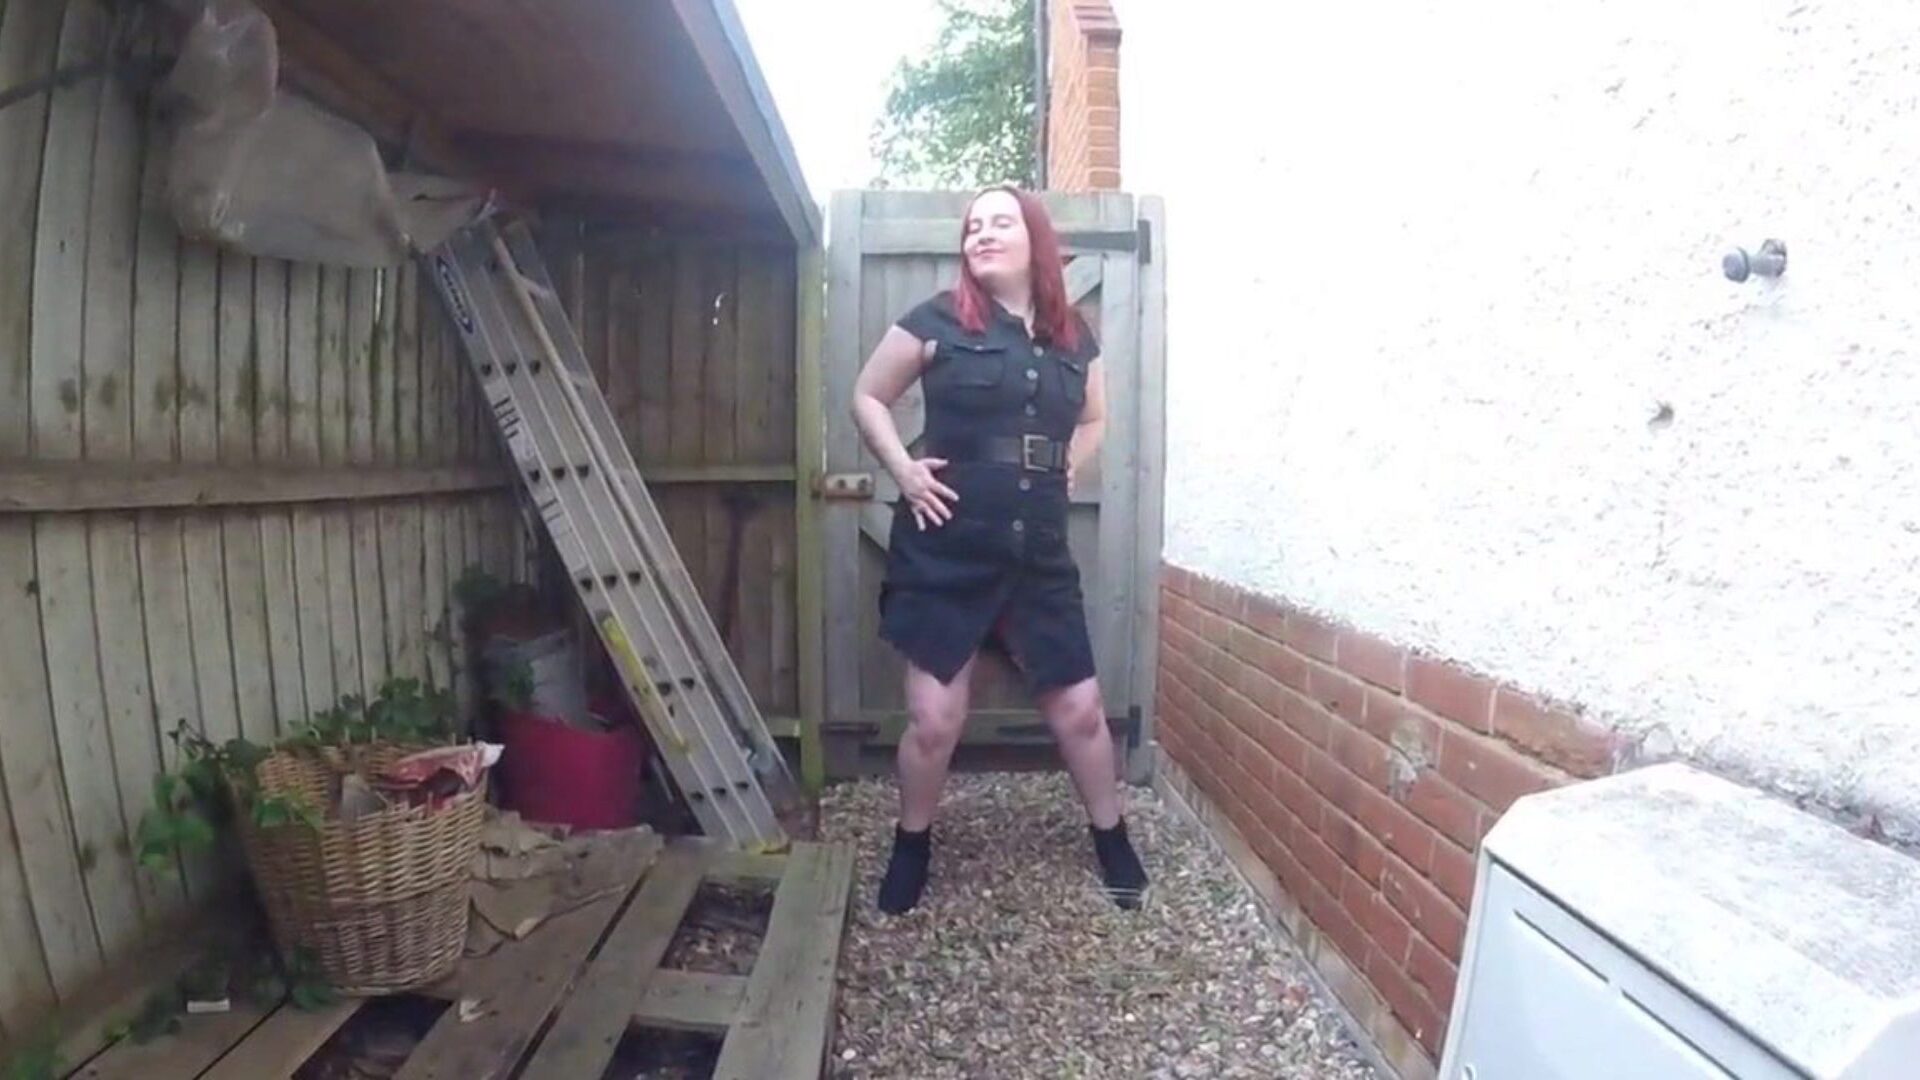 Sexy Black Button Down Dress in the Yard, Porn 91: xHamster Watch Sexy Black Button Down Dress in the Yard clip on xHamster, the hottest HD fuckfest tube web resource with tons of free-for-all British Xxx Black & Sexy Twitter porn movies